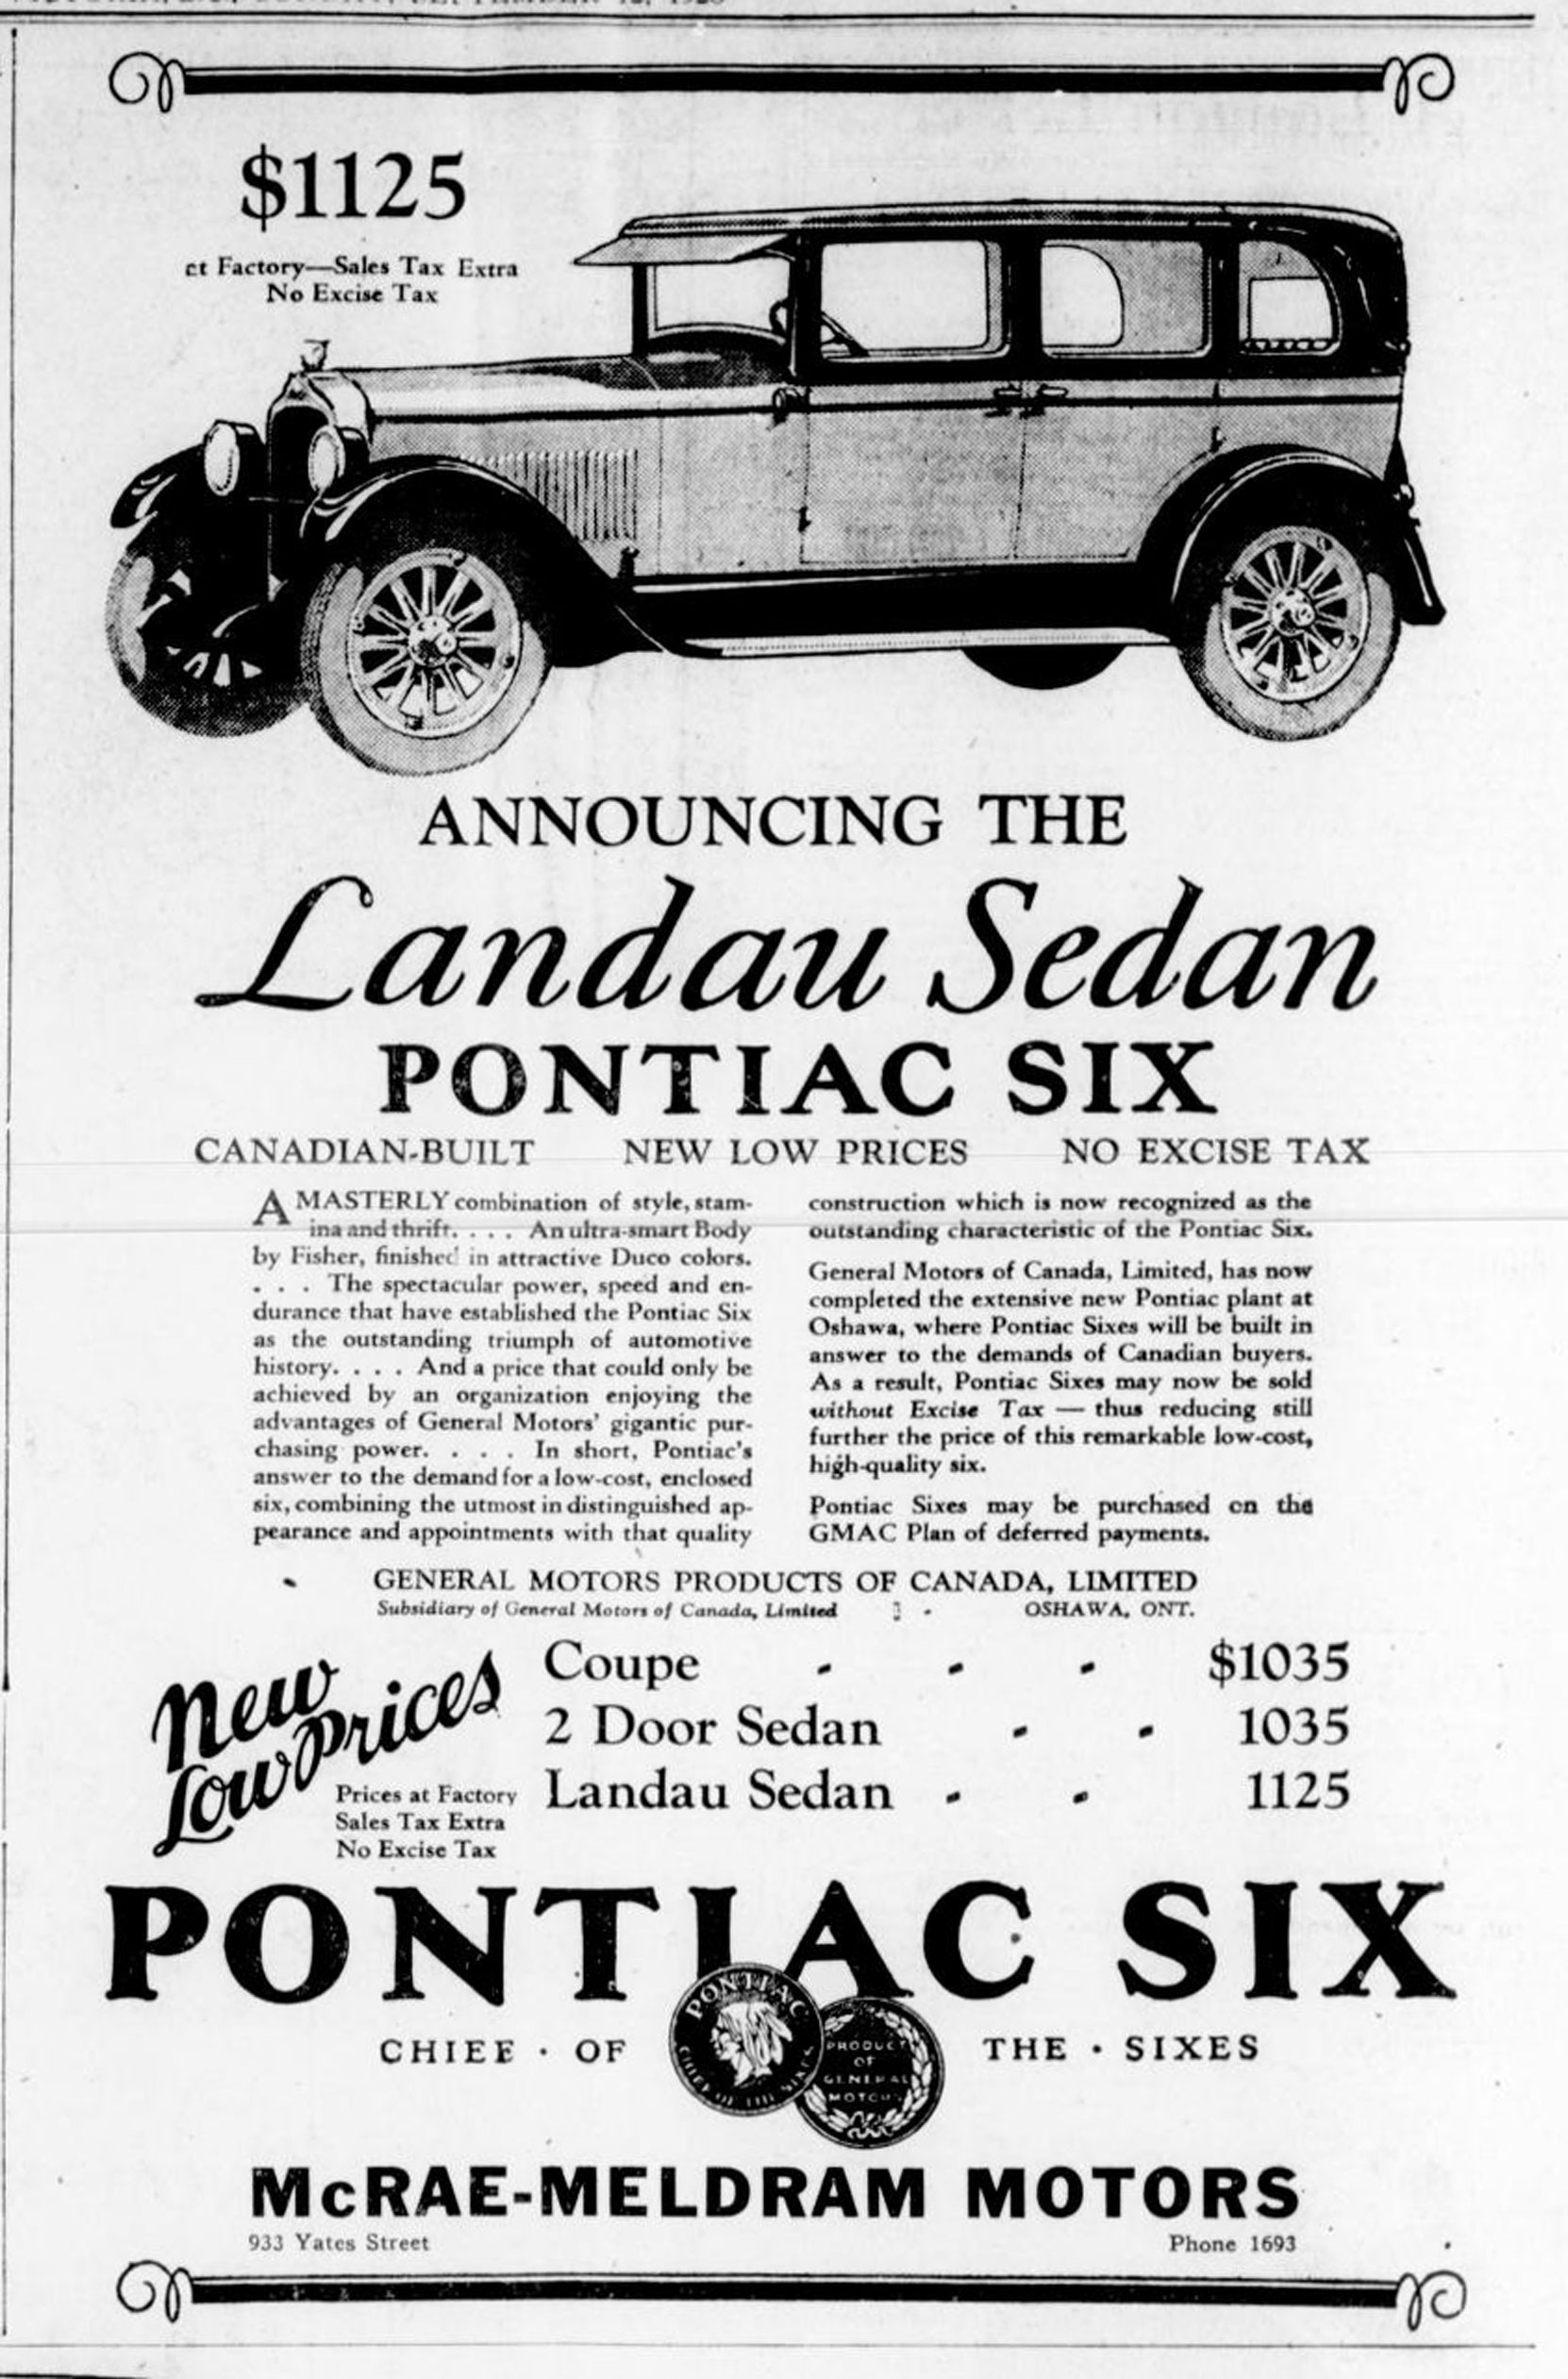 1926 advertisement for Pontiac Six automobiles, placed by McRae-Meldrum Motors, 933 Yates Street. (Victoria Online Sightseeing Tours collection)